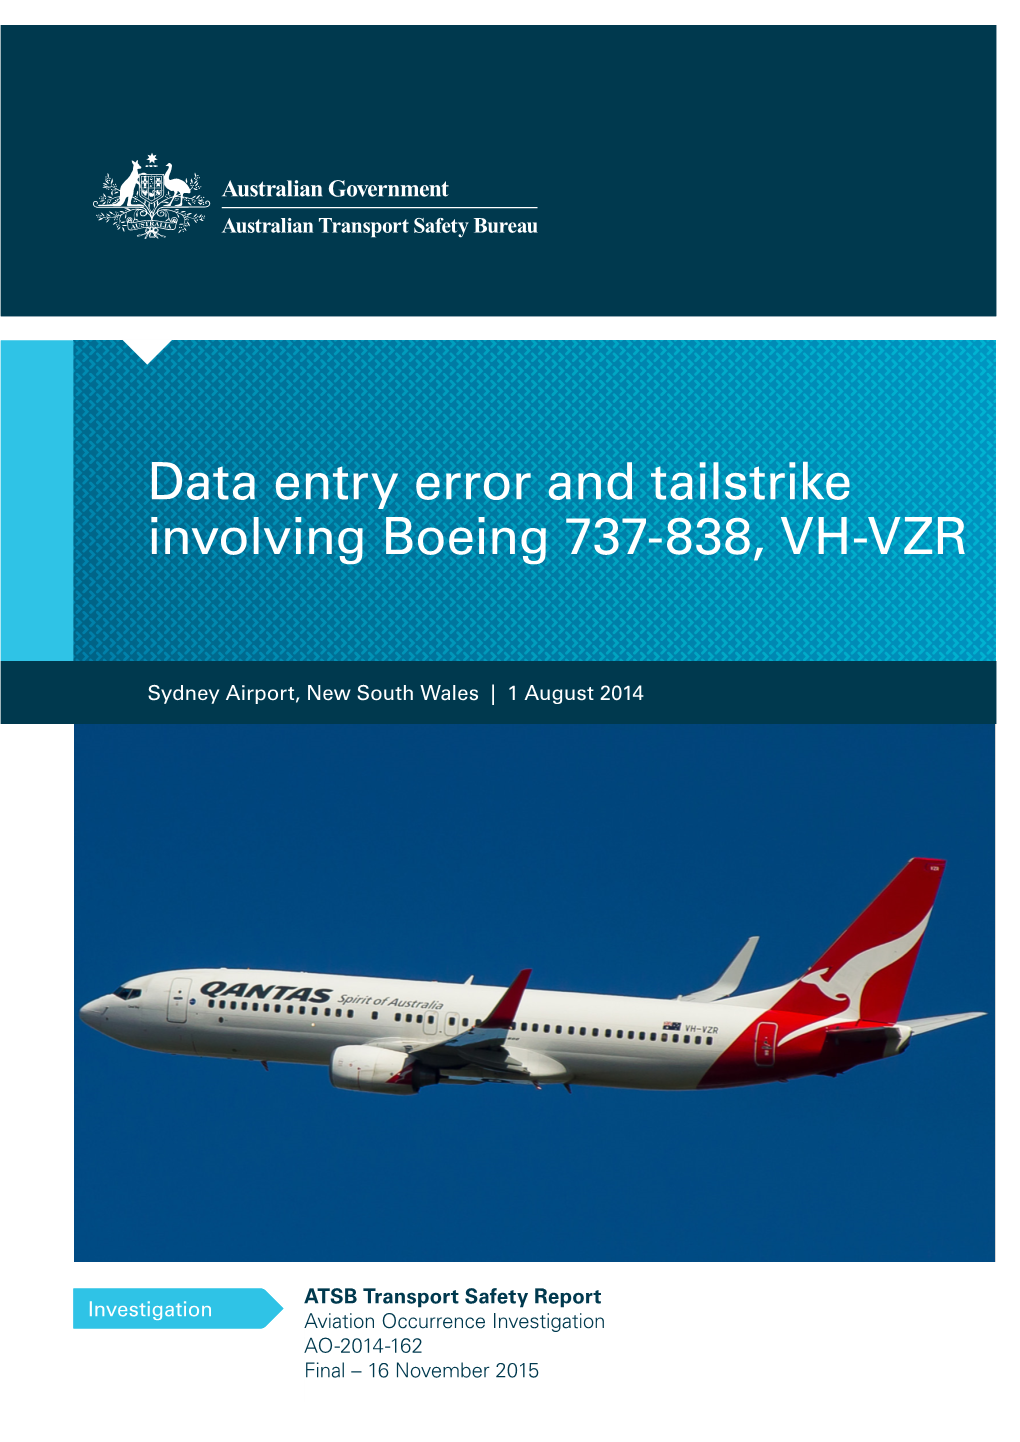 Data Entry Error and Tailstrike Involving Boeing 737-838 VH-VZR Sydney Airport, New South Wales, 1 August 2014